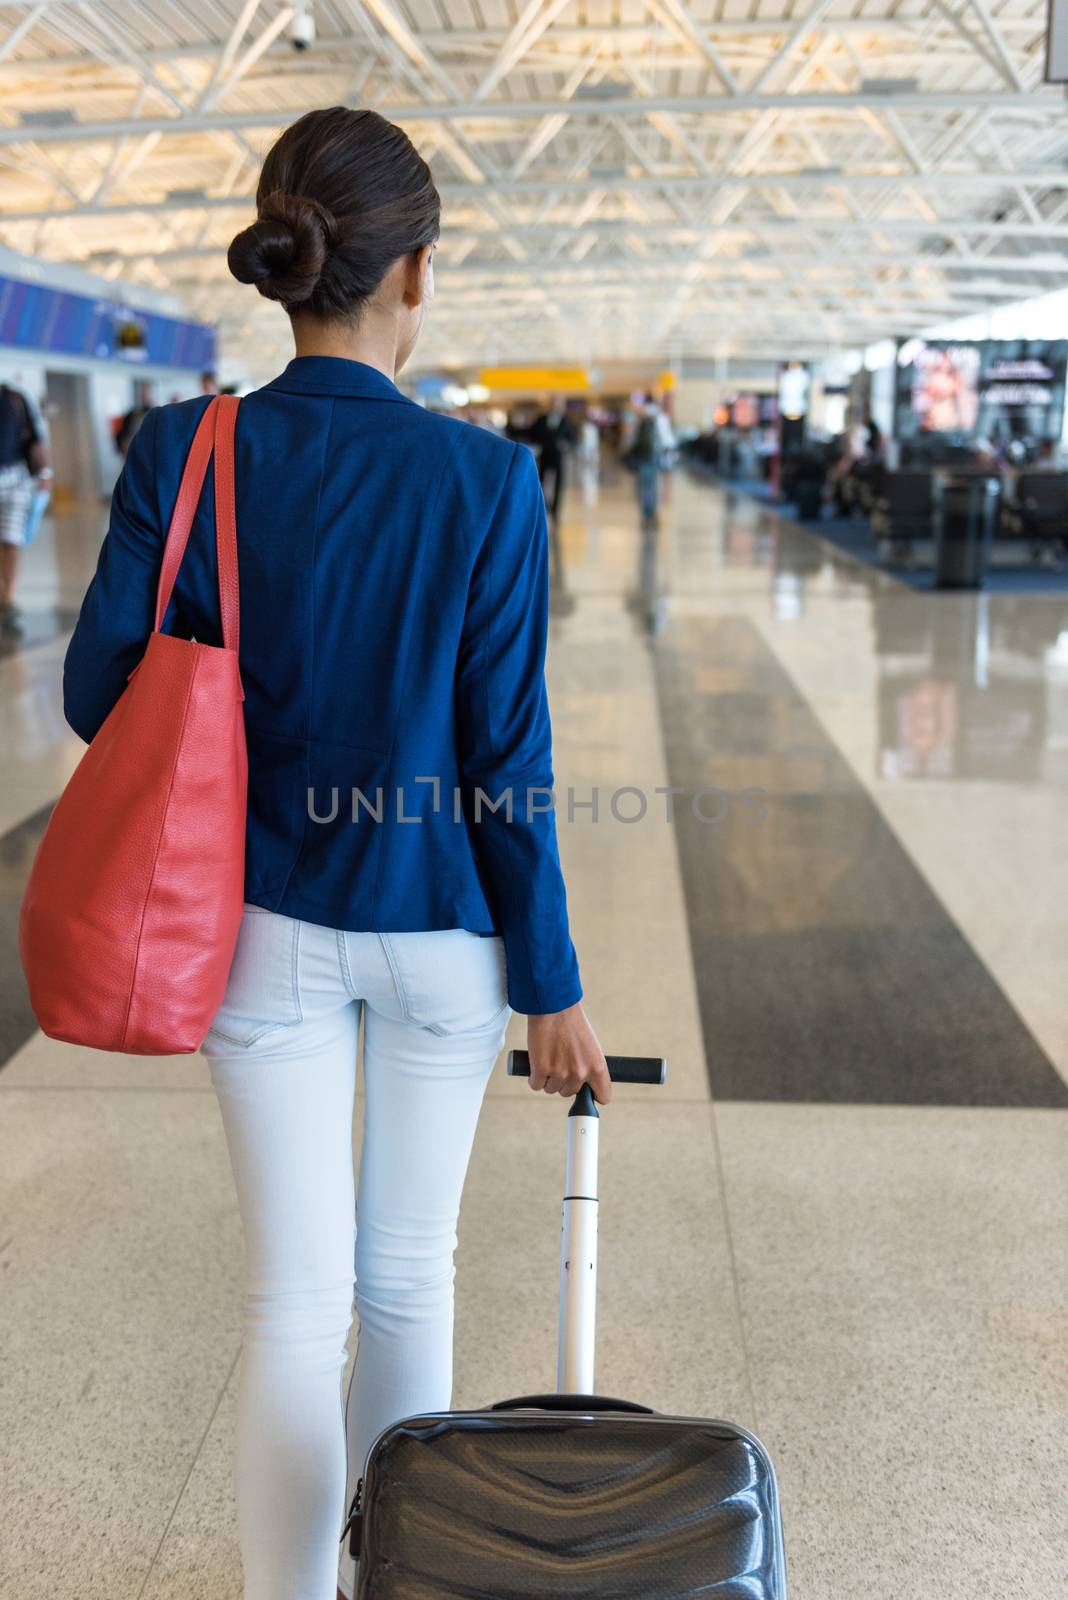 Woman traveler walking through airport terminal going to gate carrying purse and carry-on hand luggage for flight travel by Maridav